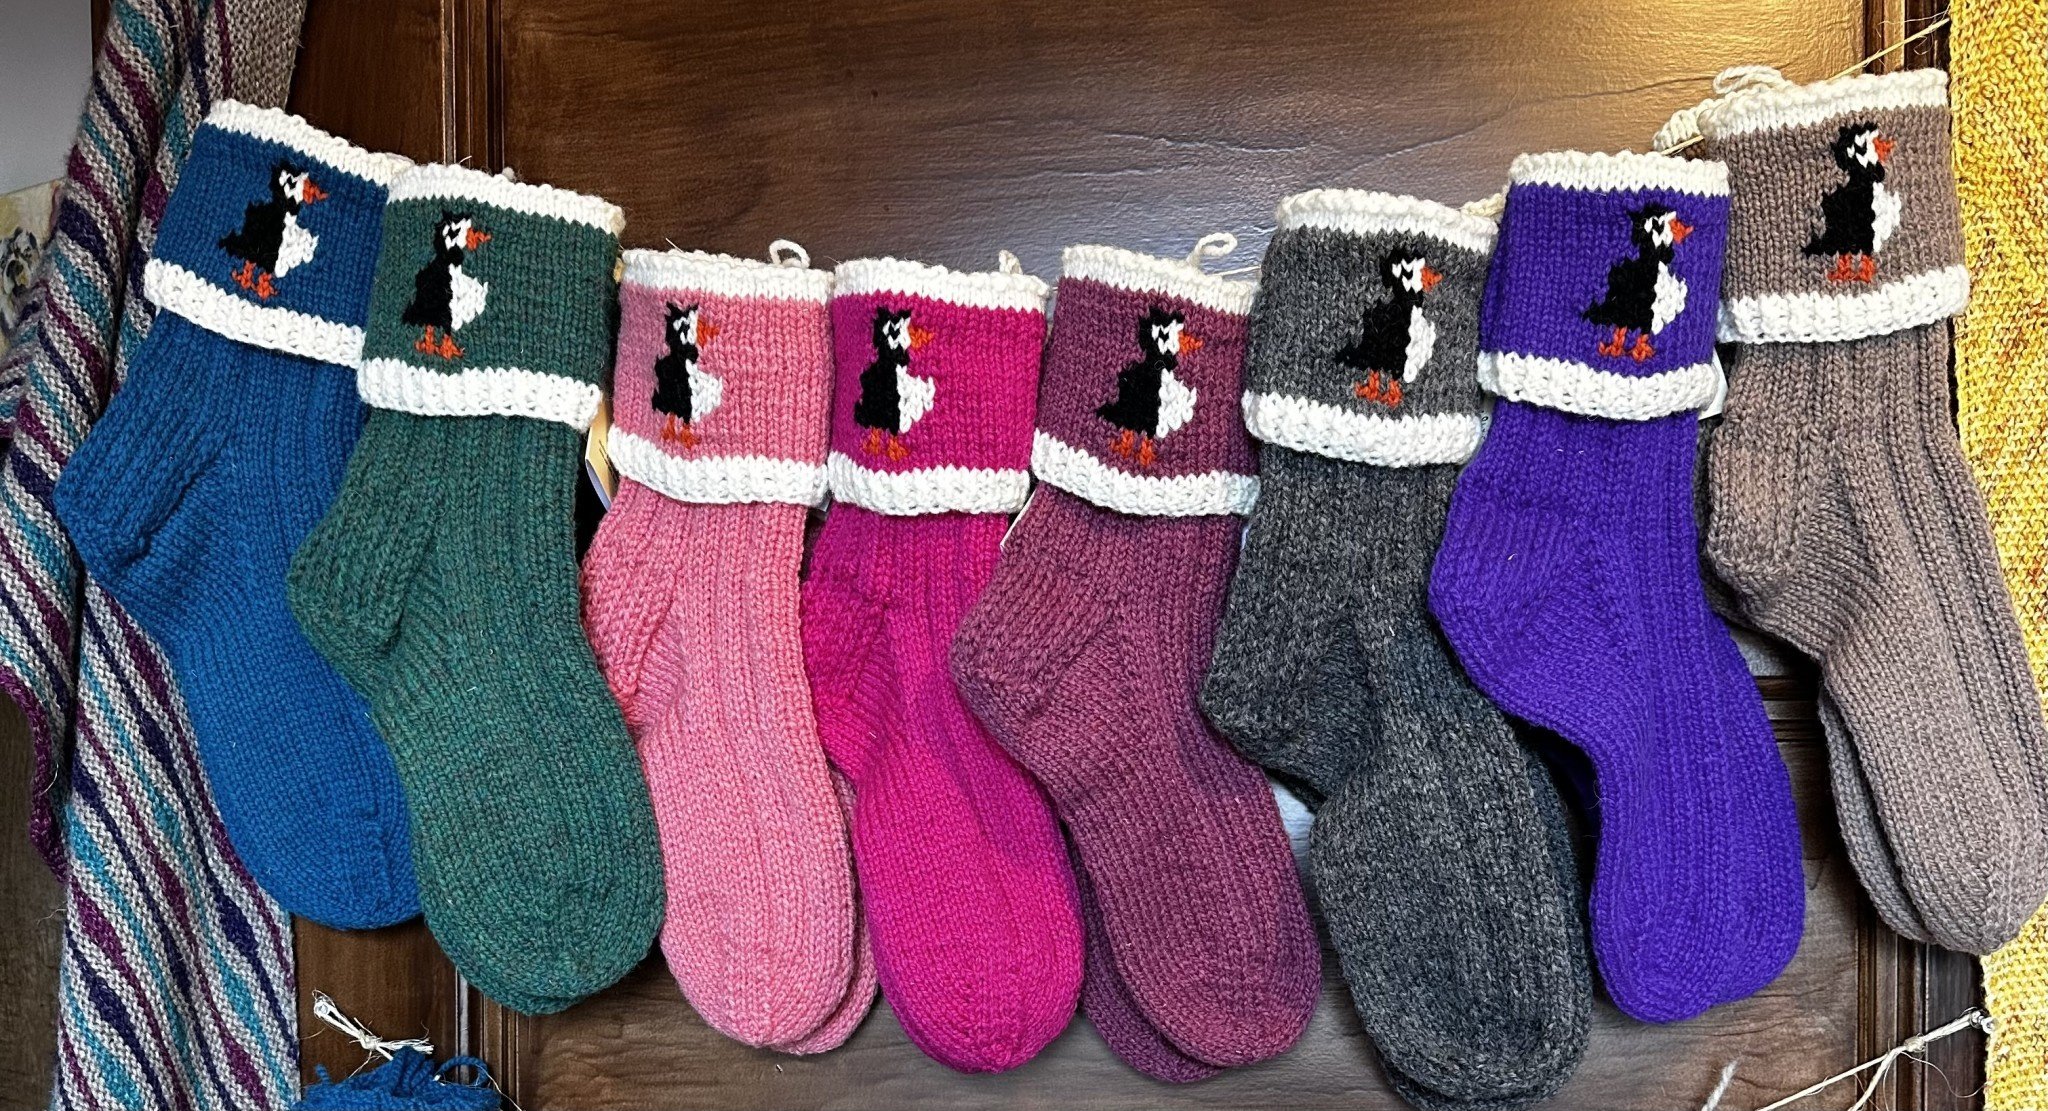 Marie’s Knits (Hot Pink Puffin Socks)